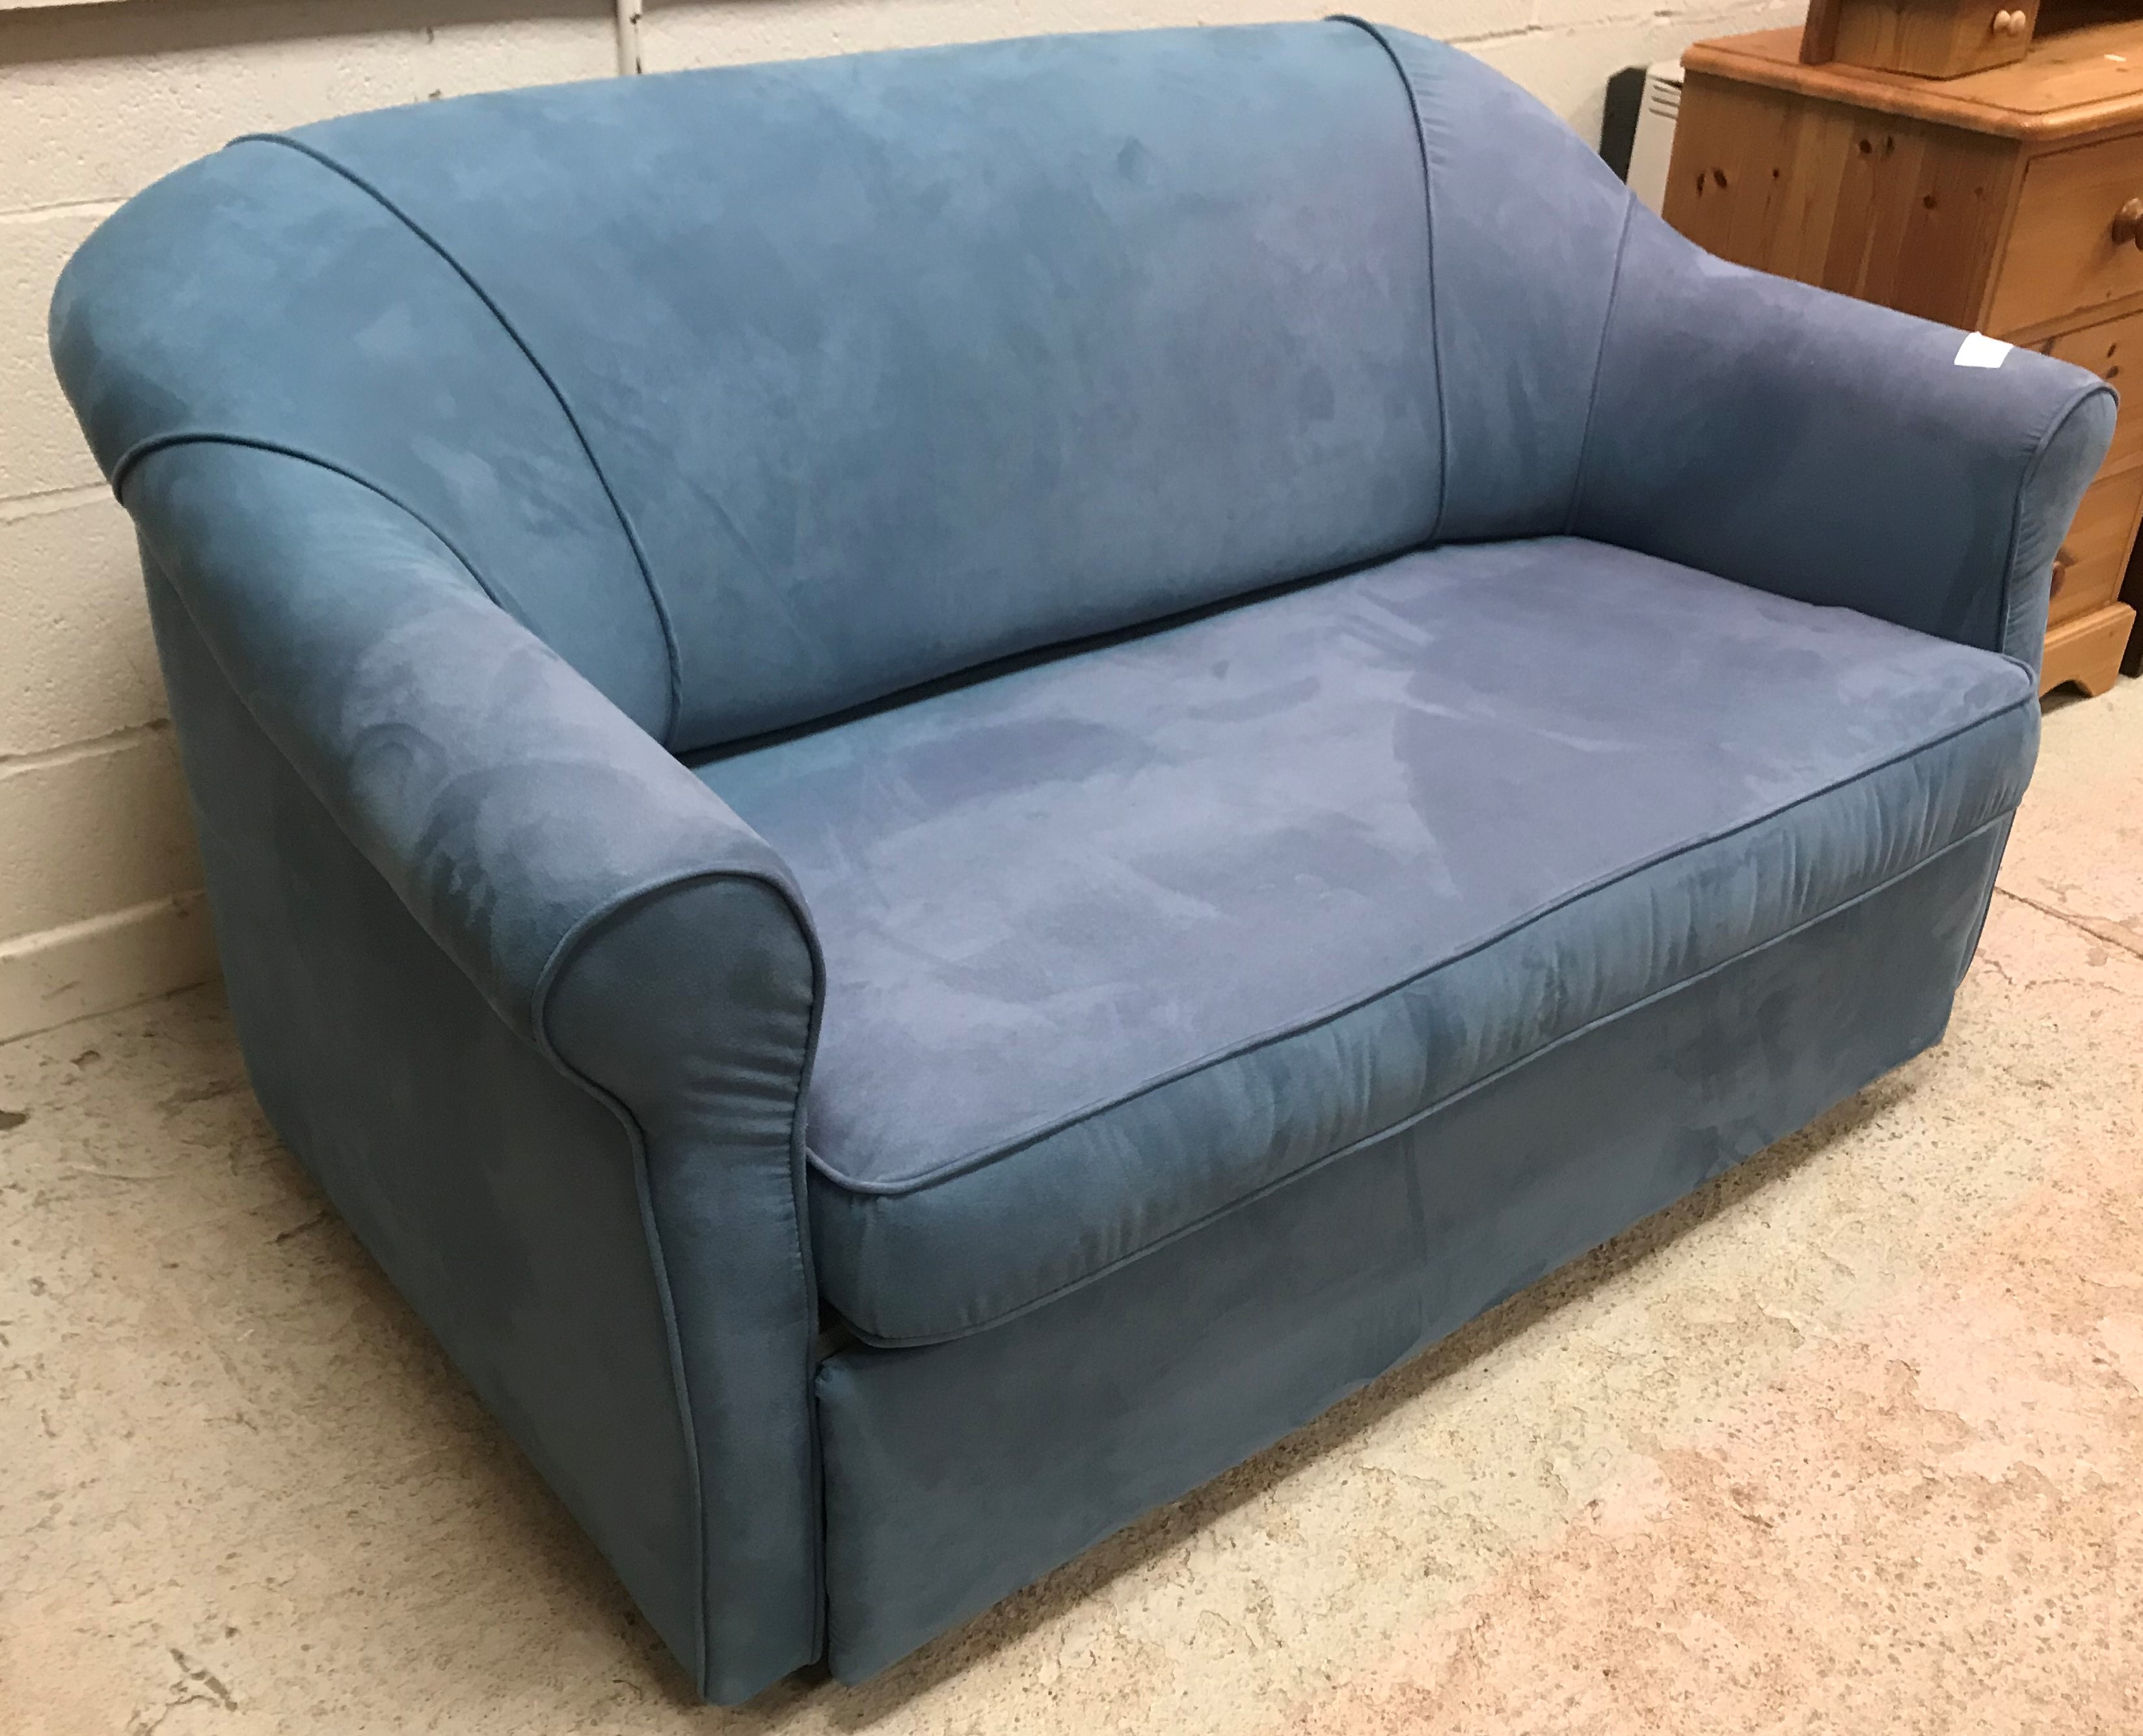 A modern blue suede effect two seat scroll arm bed settee or sofa bed,